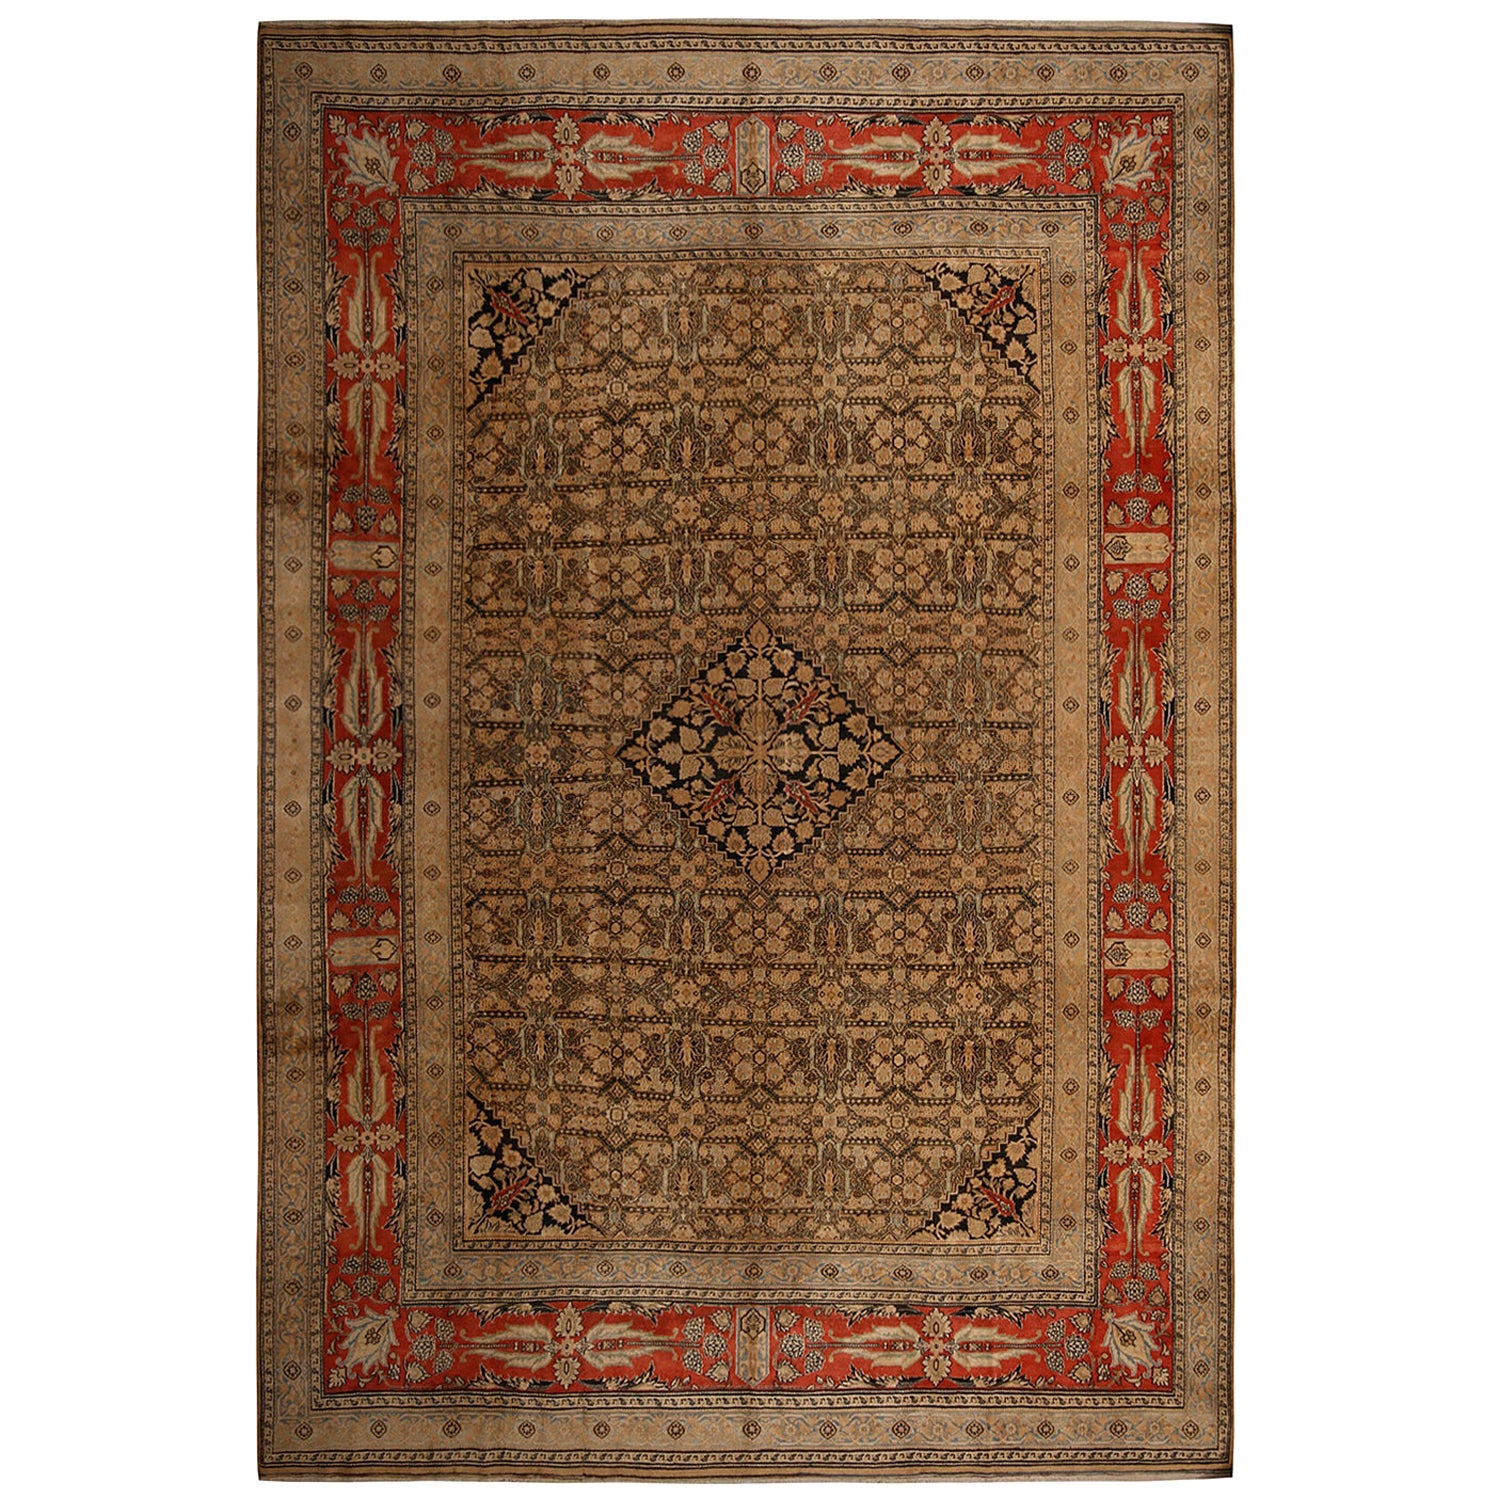 Antique Doroksh Traditional Beige-Brown and Red Wool Persian Rug by Rug & Kilim For Sale